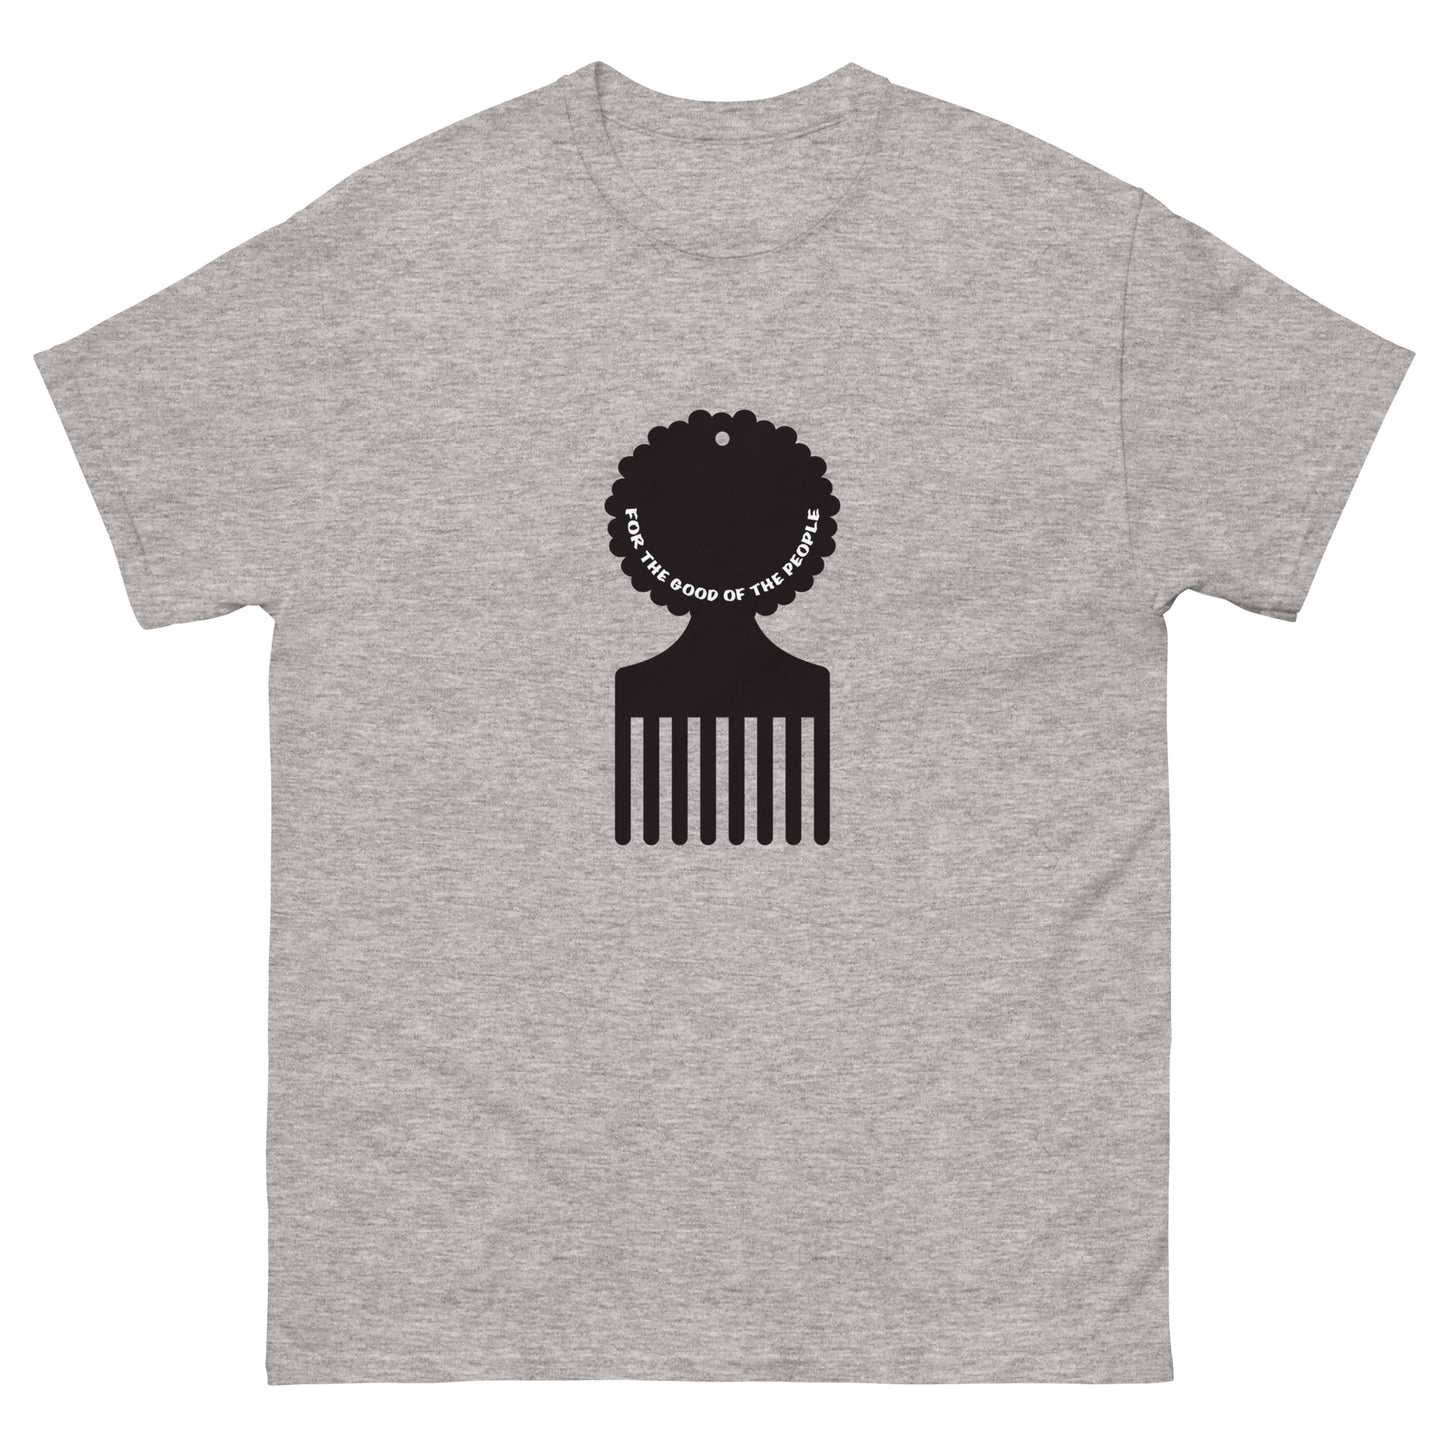 Men's heather gray tee with black afro pick in the center of shirt, with for the good of the people in white inside the afro pick's handle.